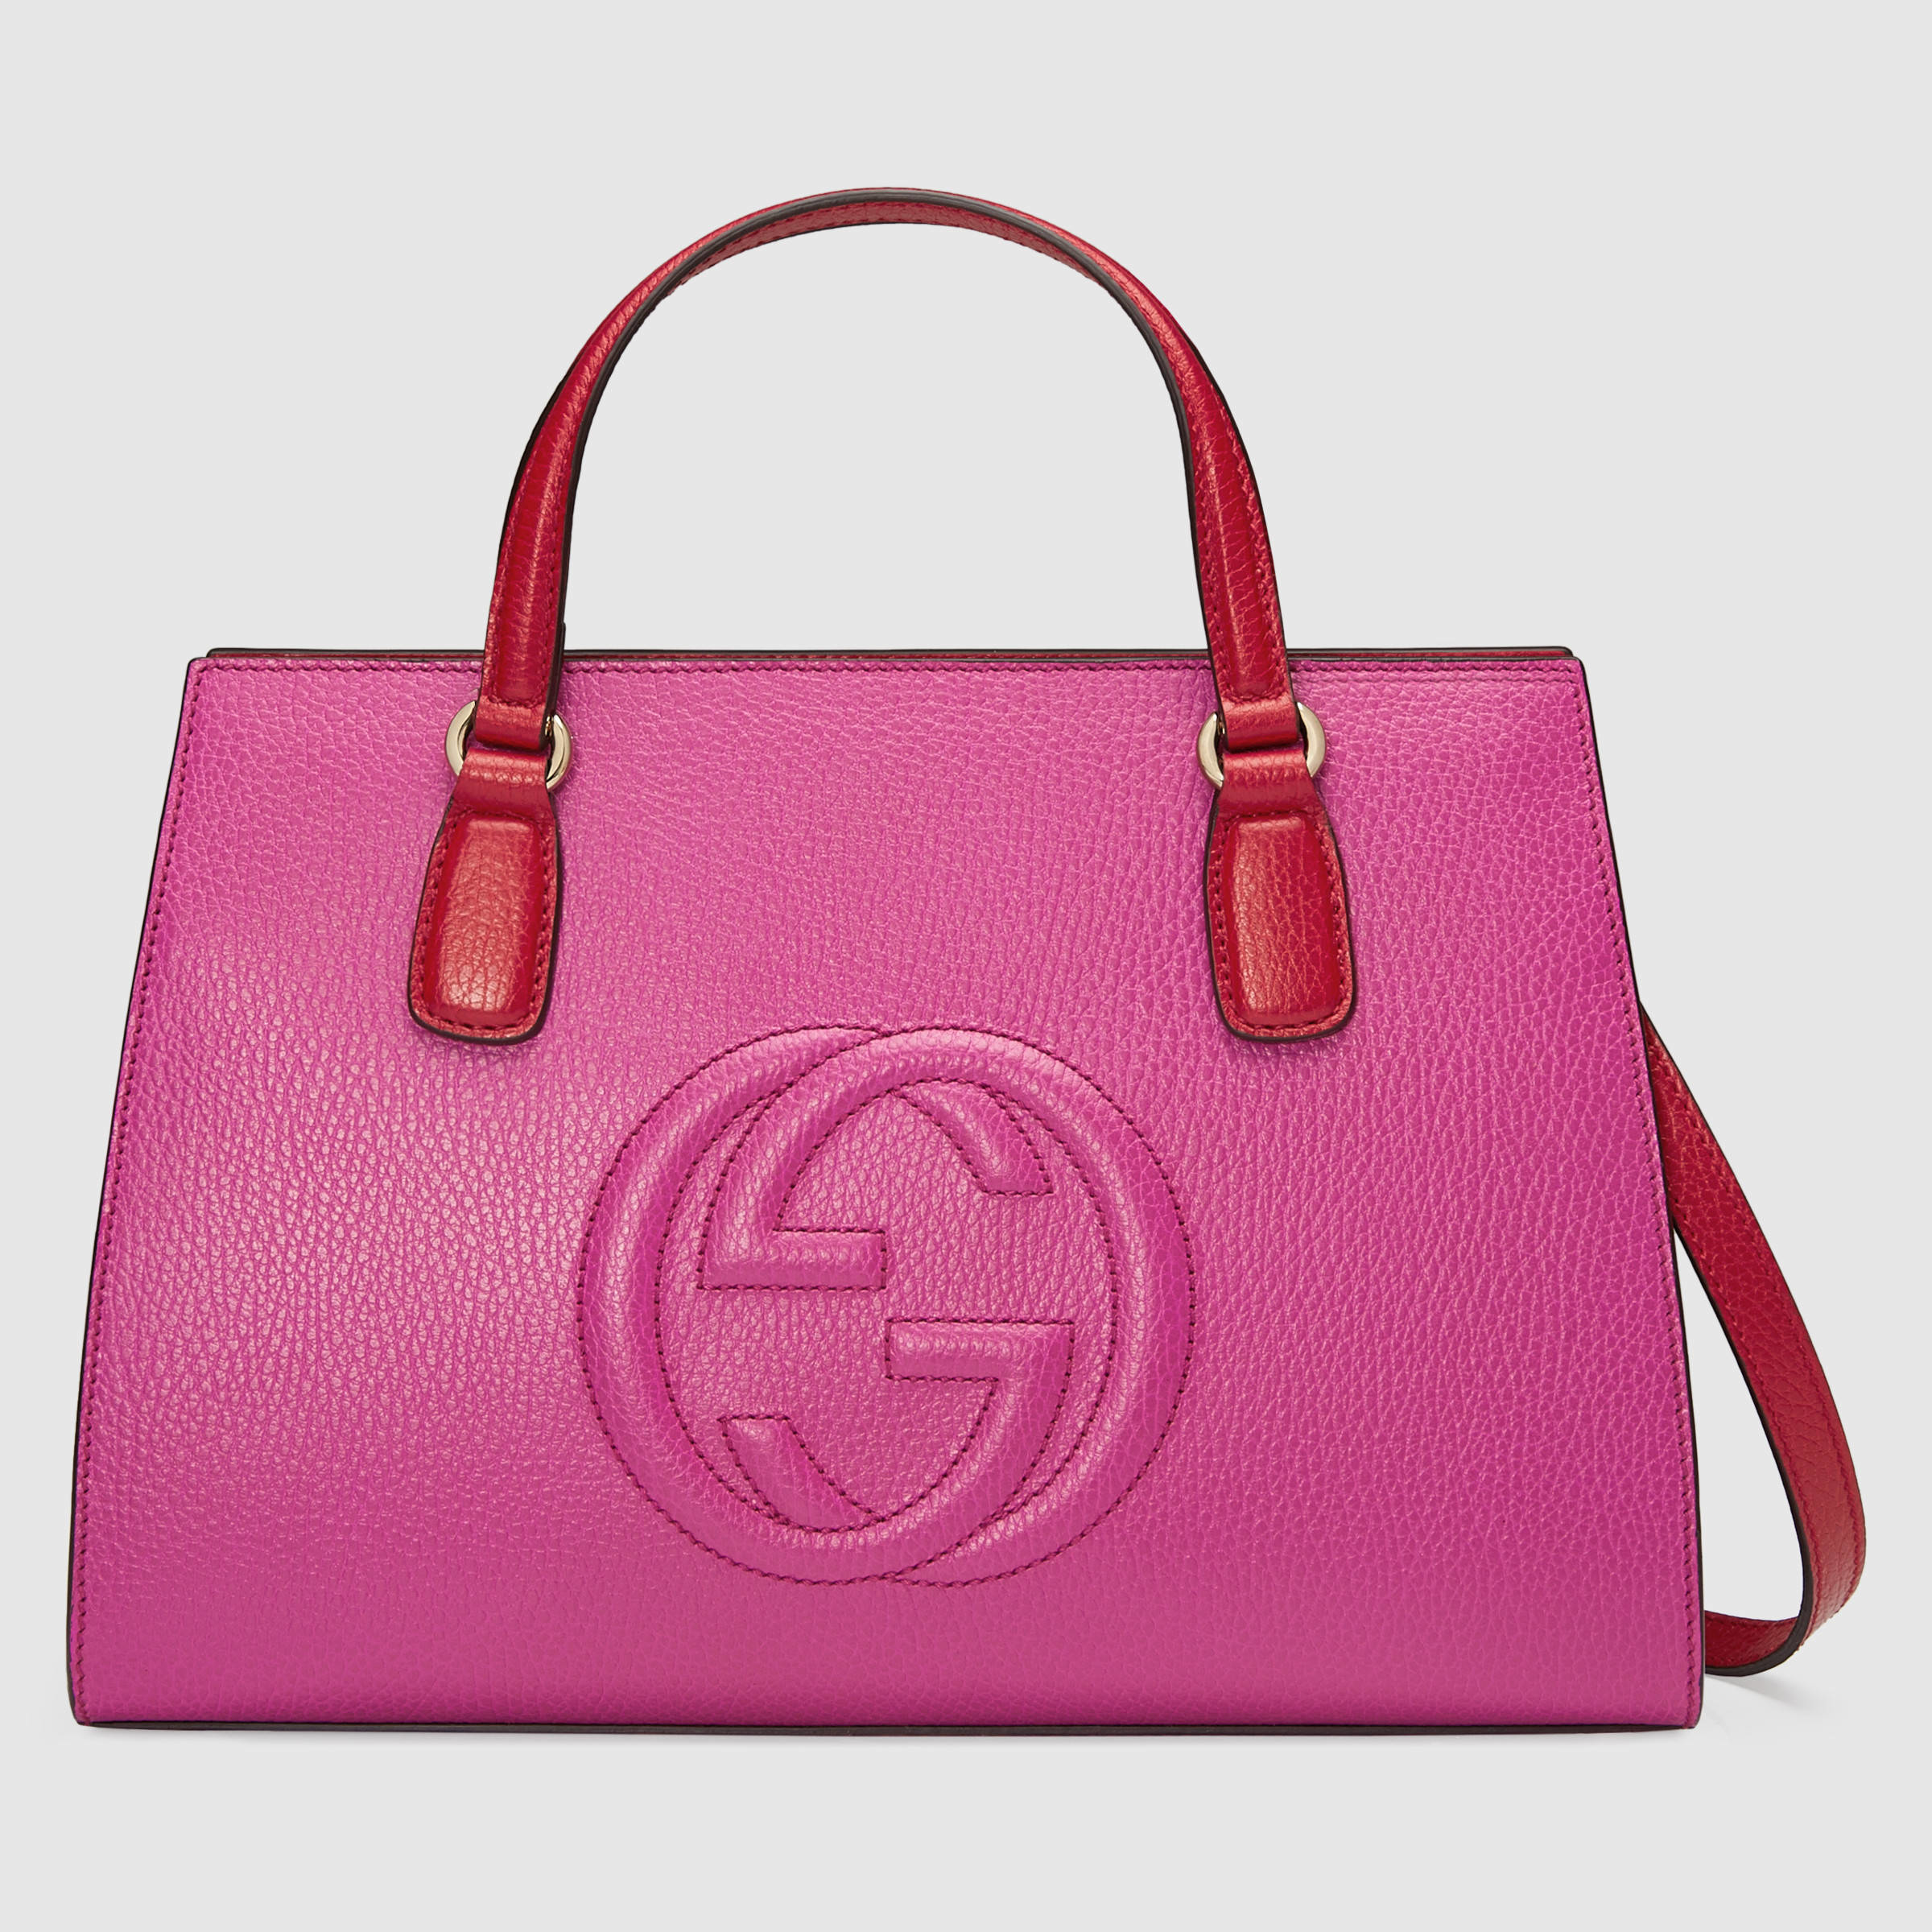 Lyst - Gucci Soho Leather Top Handle Bag in Pink